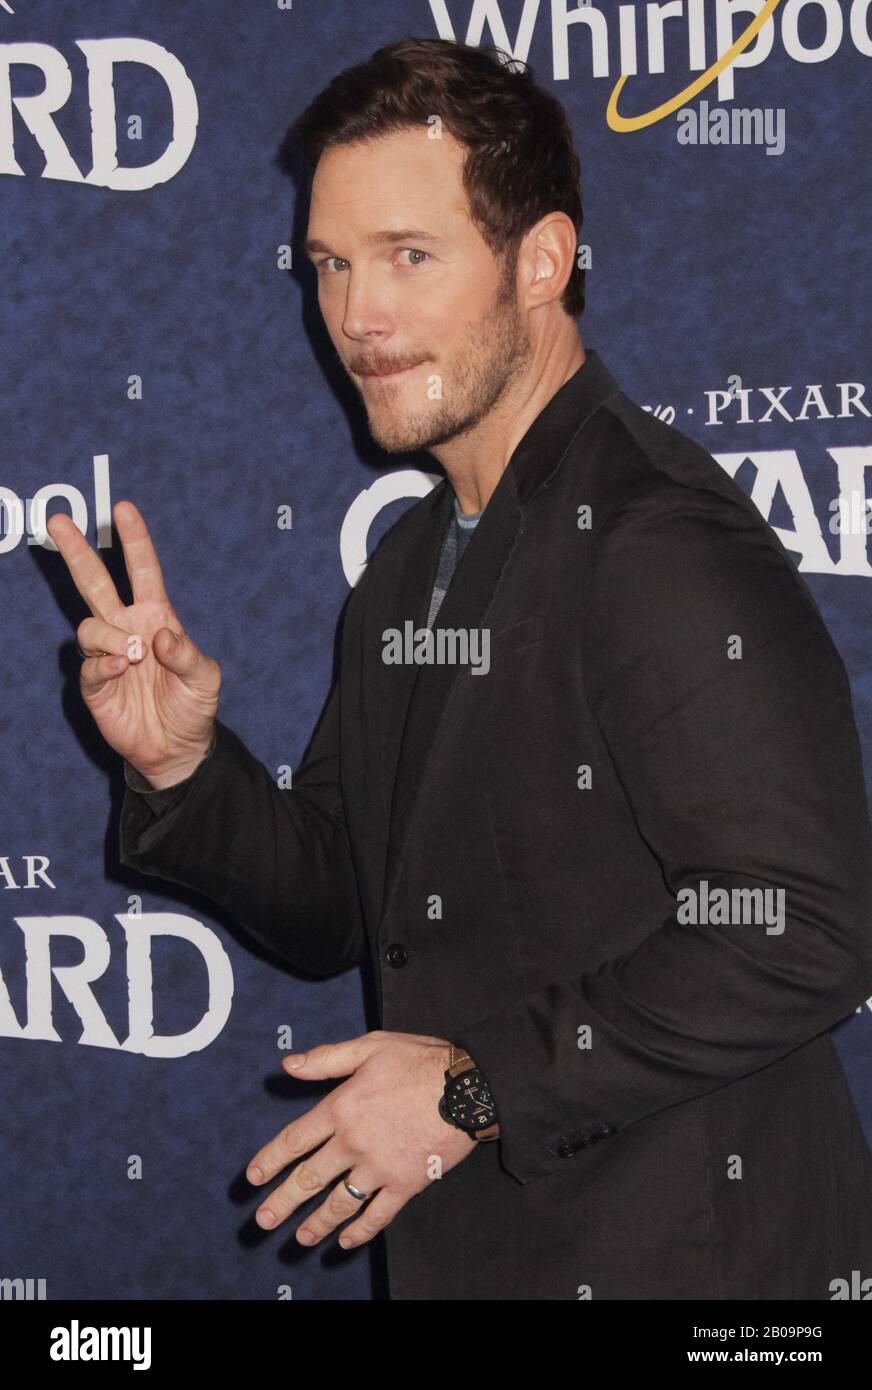 Chris Pratt  02/18/2020 The World Premiere of "Onward" held at The El Capitan Theatre in Los Angeles, CA. Photo by I. Hasegawa / HNW / PictureLux Stock Photo